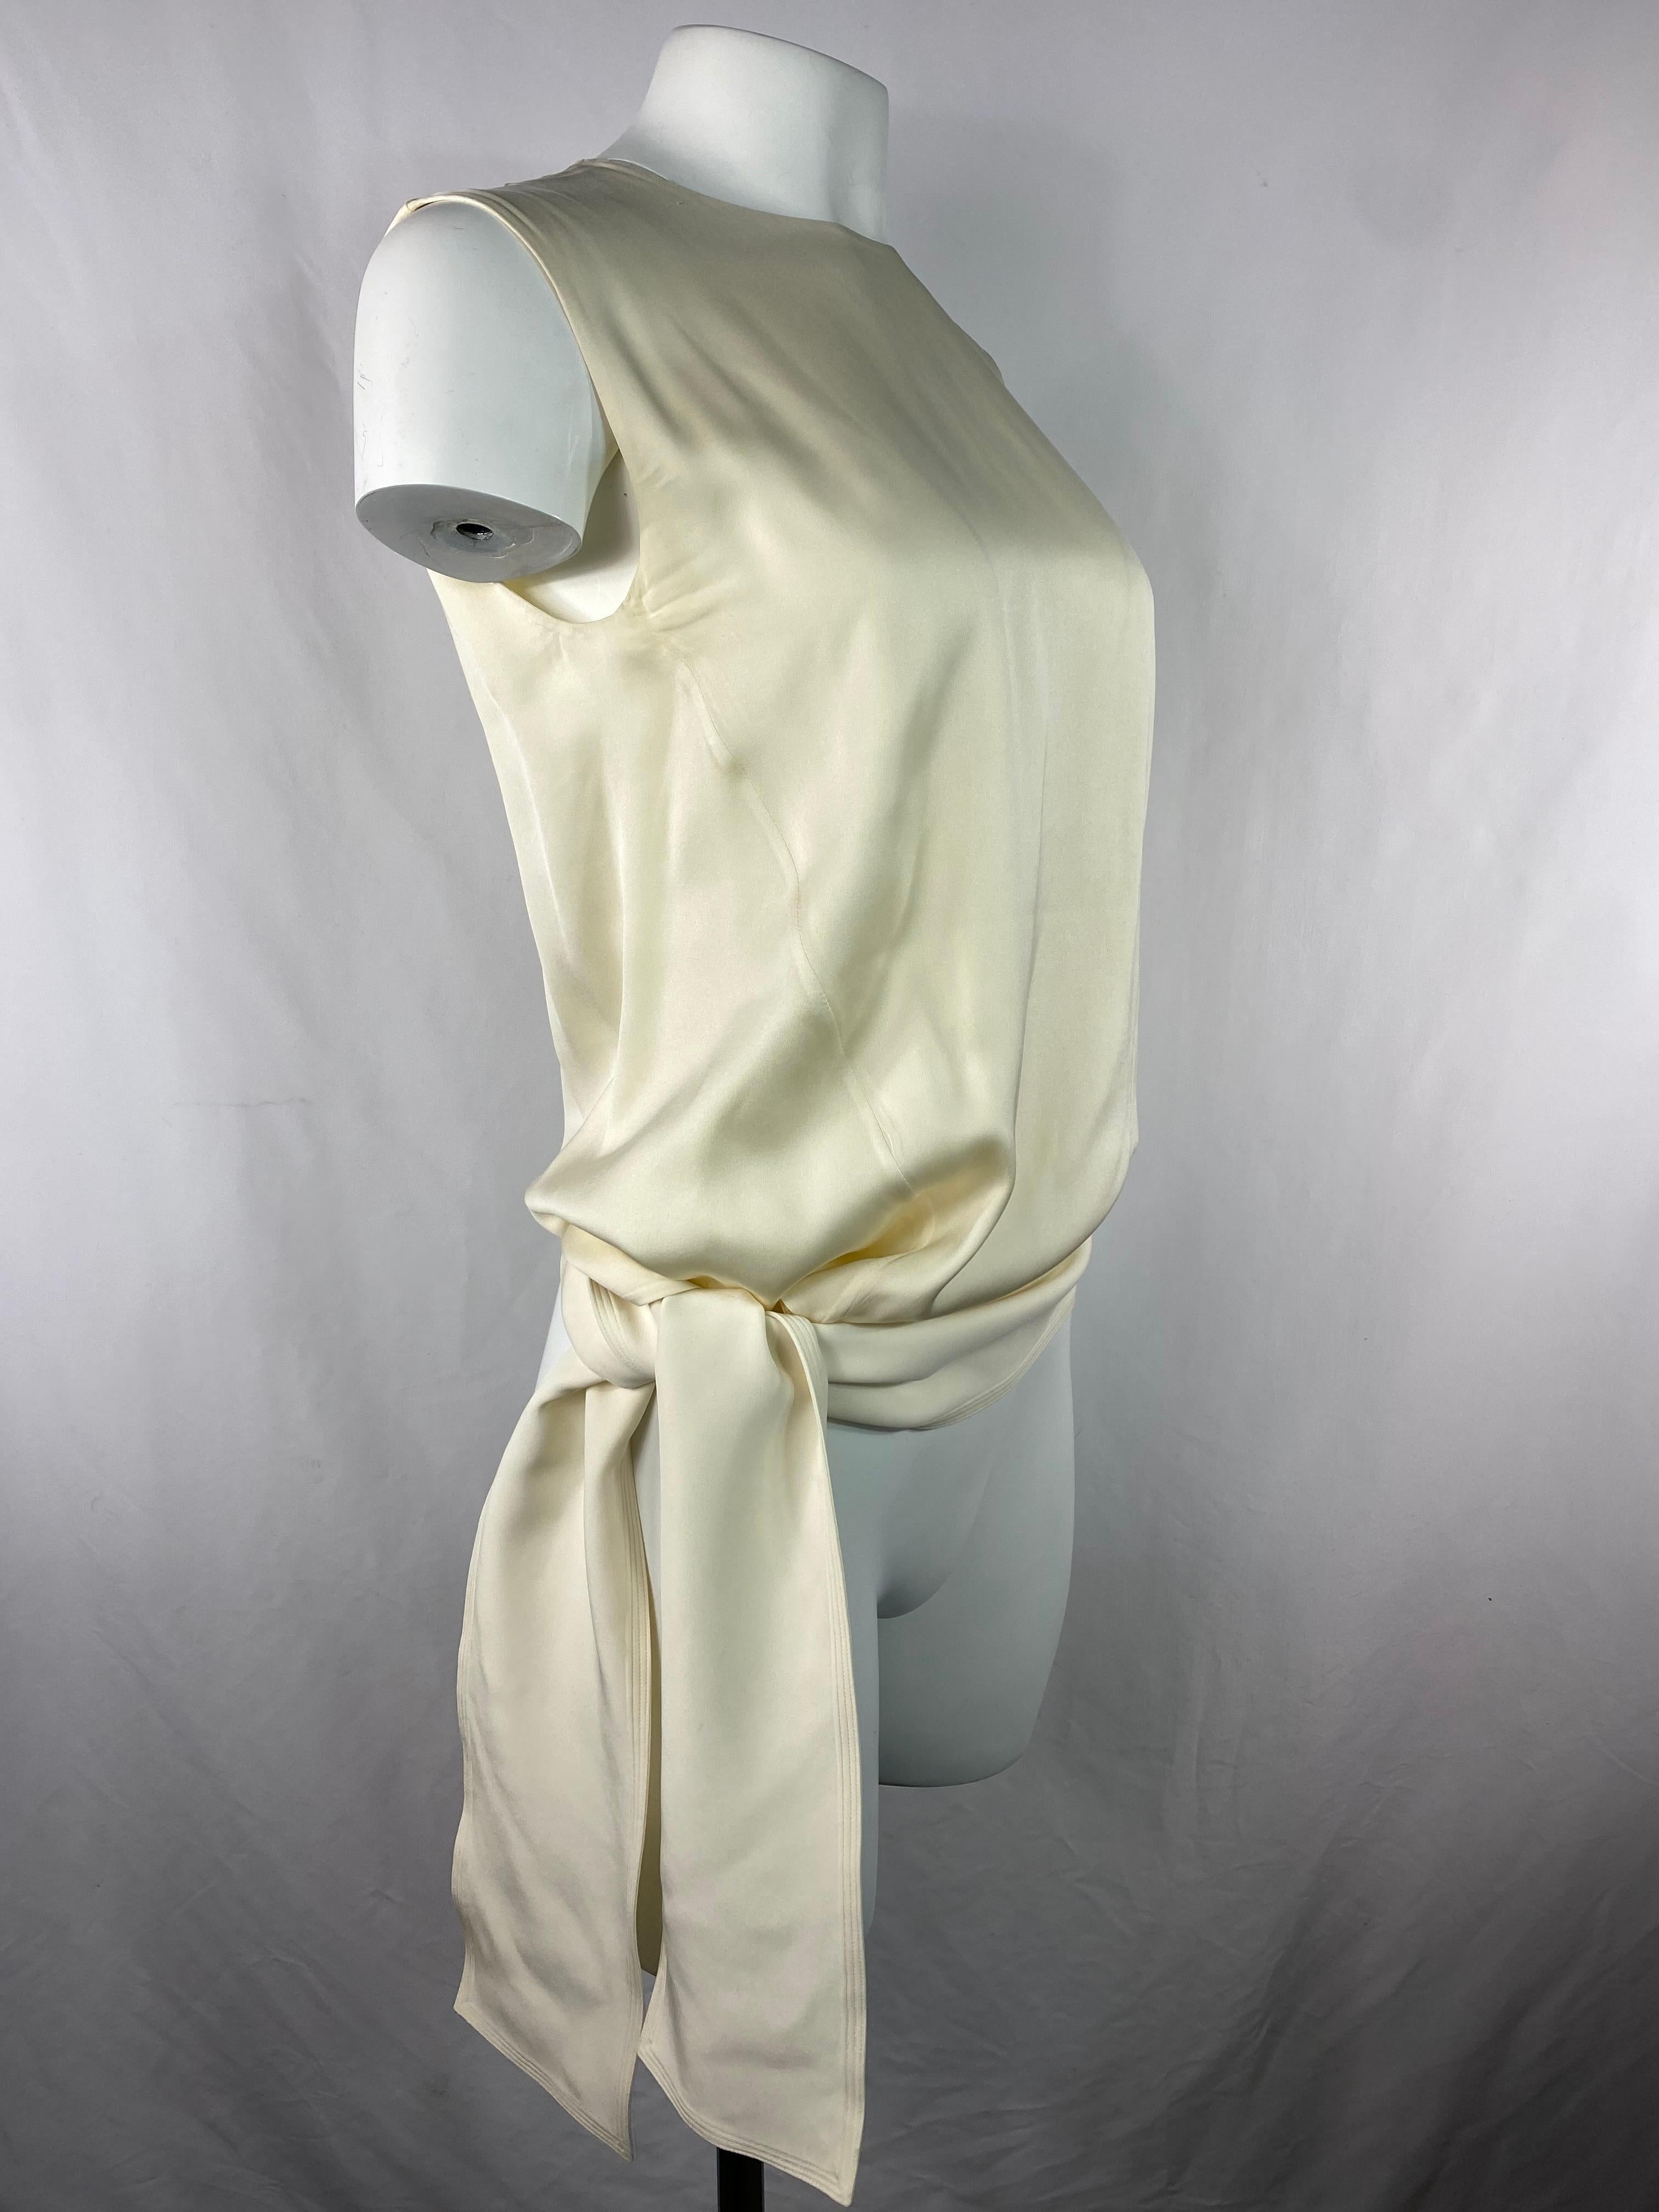 Product details:

The top made of 100% silk in cream/ ivory color, sleeveless  with crew neck line and size tie detail designed by Celine in Paris. It closures with rear zip and hook. 